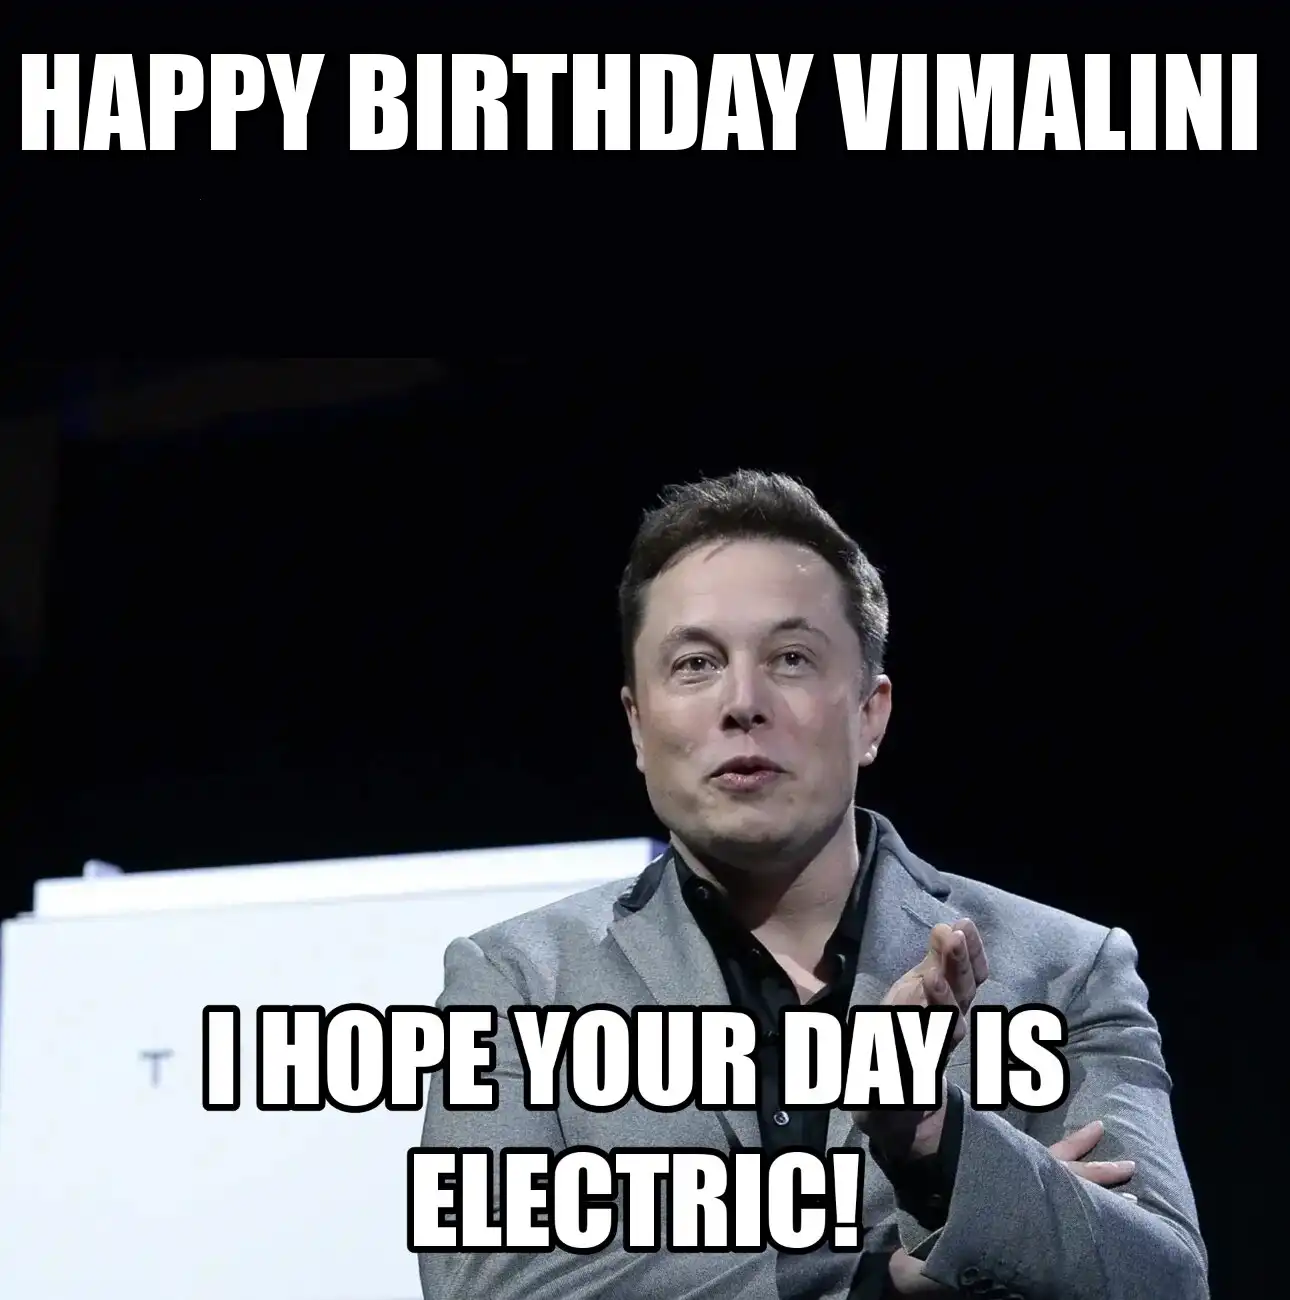 Happy Birthday Vimalini I Hope Your Day Is Electric Meme